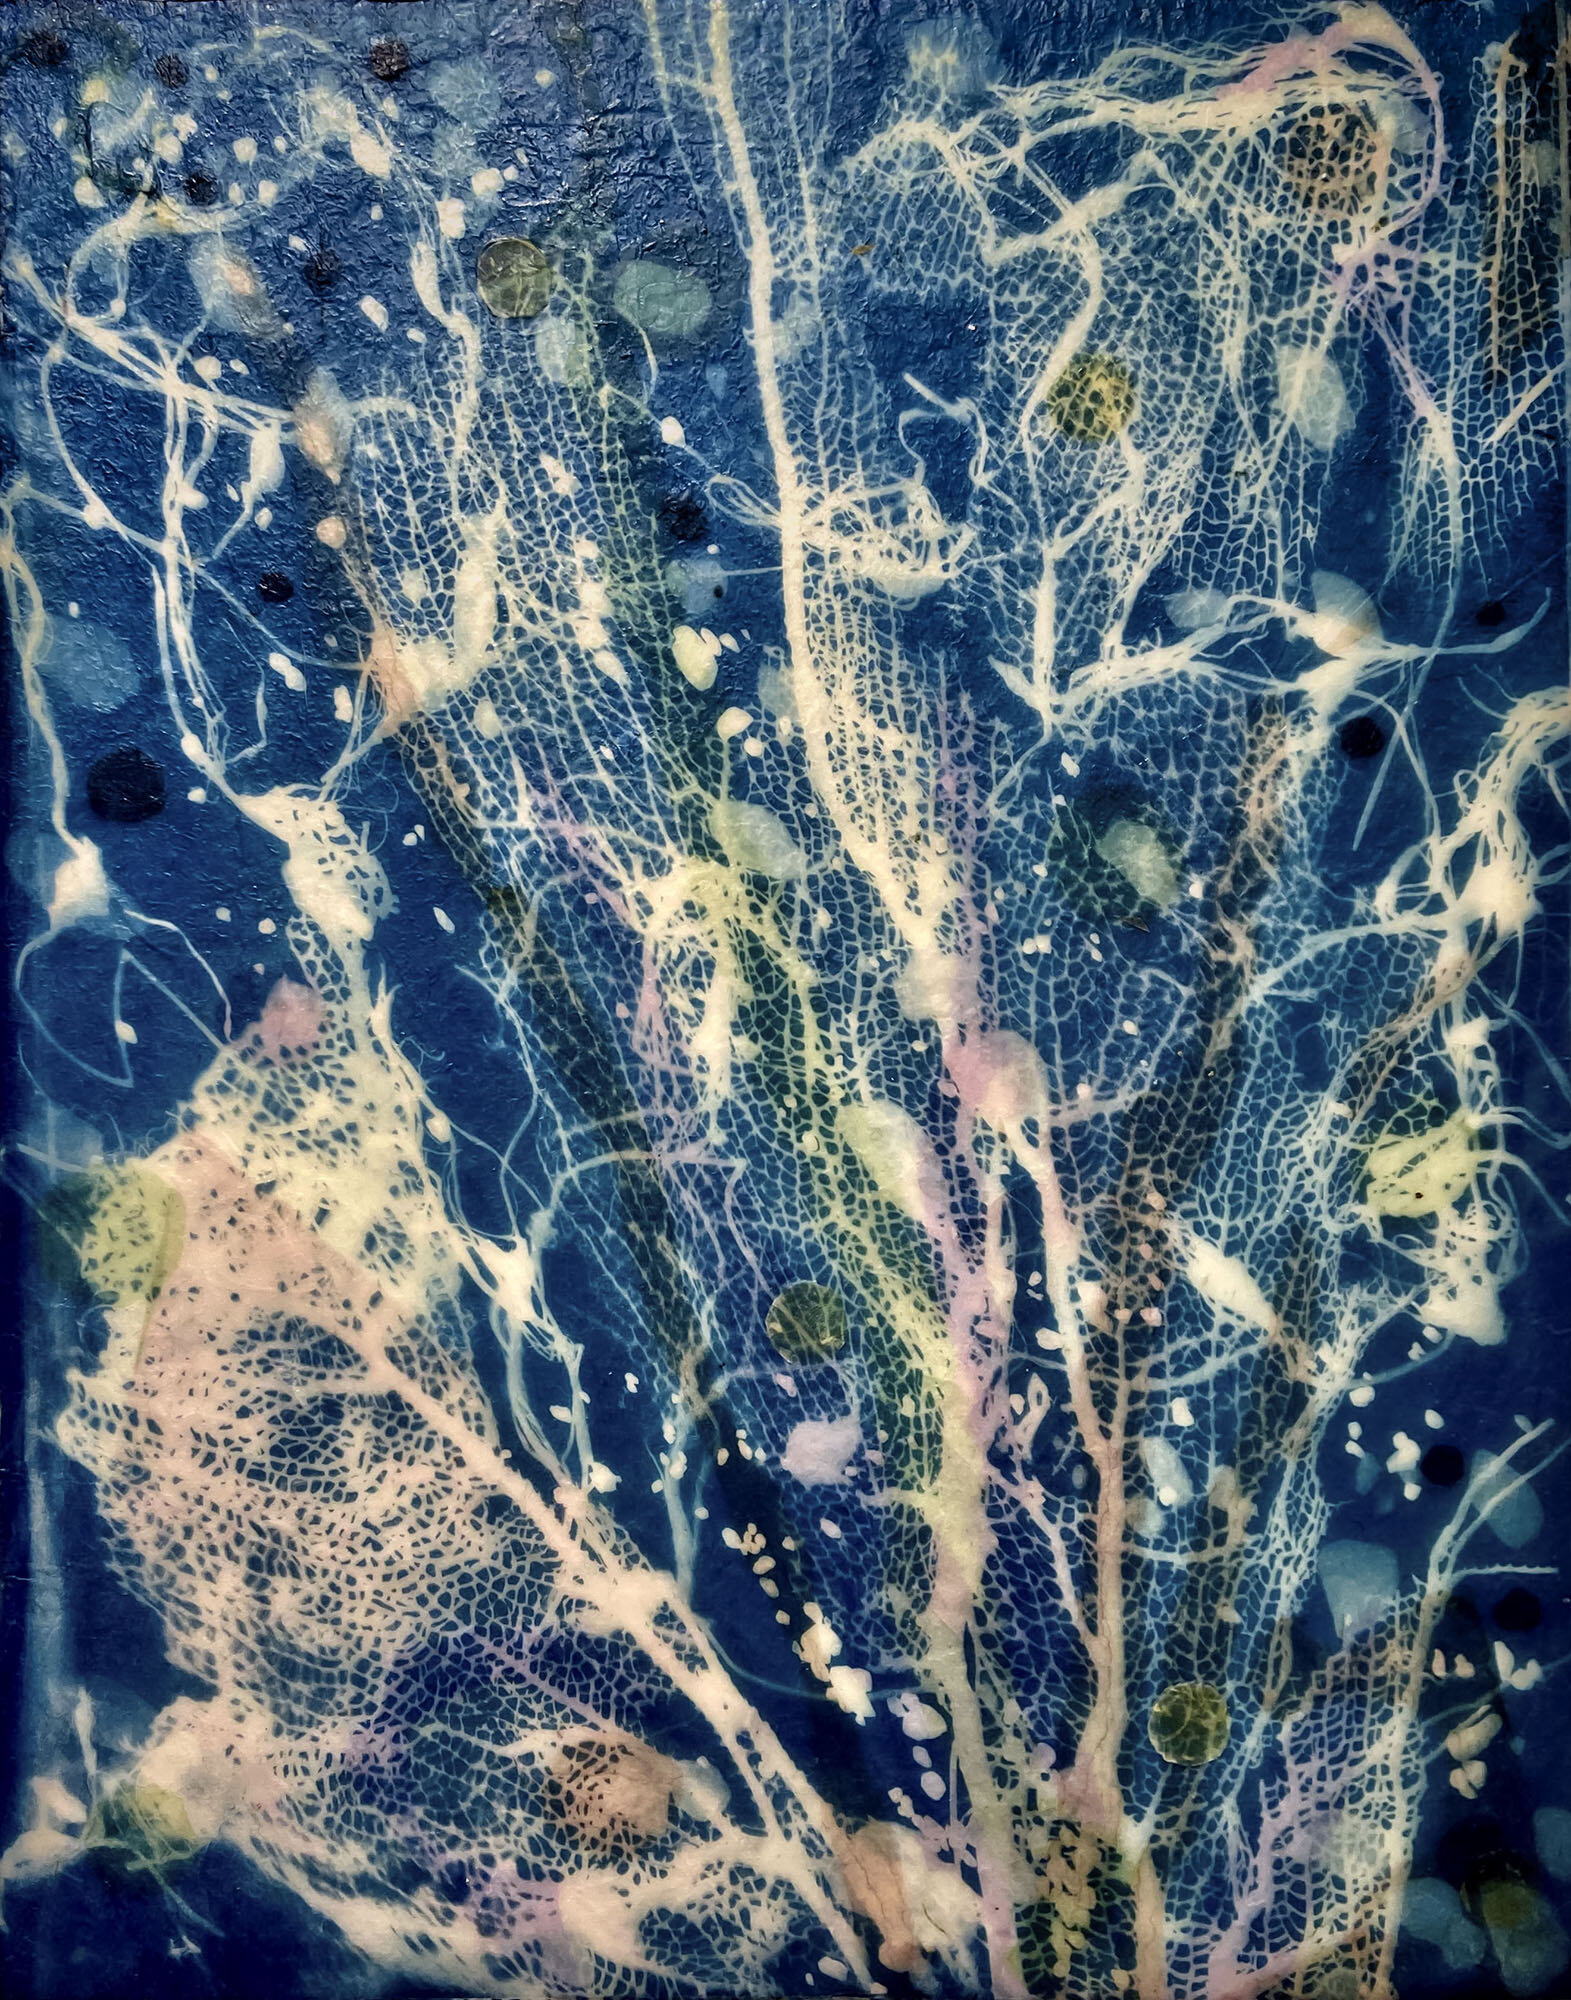   Tobago Coral Sea II, 2020   Cyanotype on Japanese rice paper, colored Japanese rice papers, wax, encaustic board   11” x 14” 